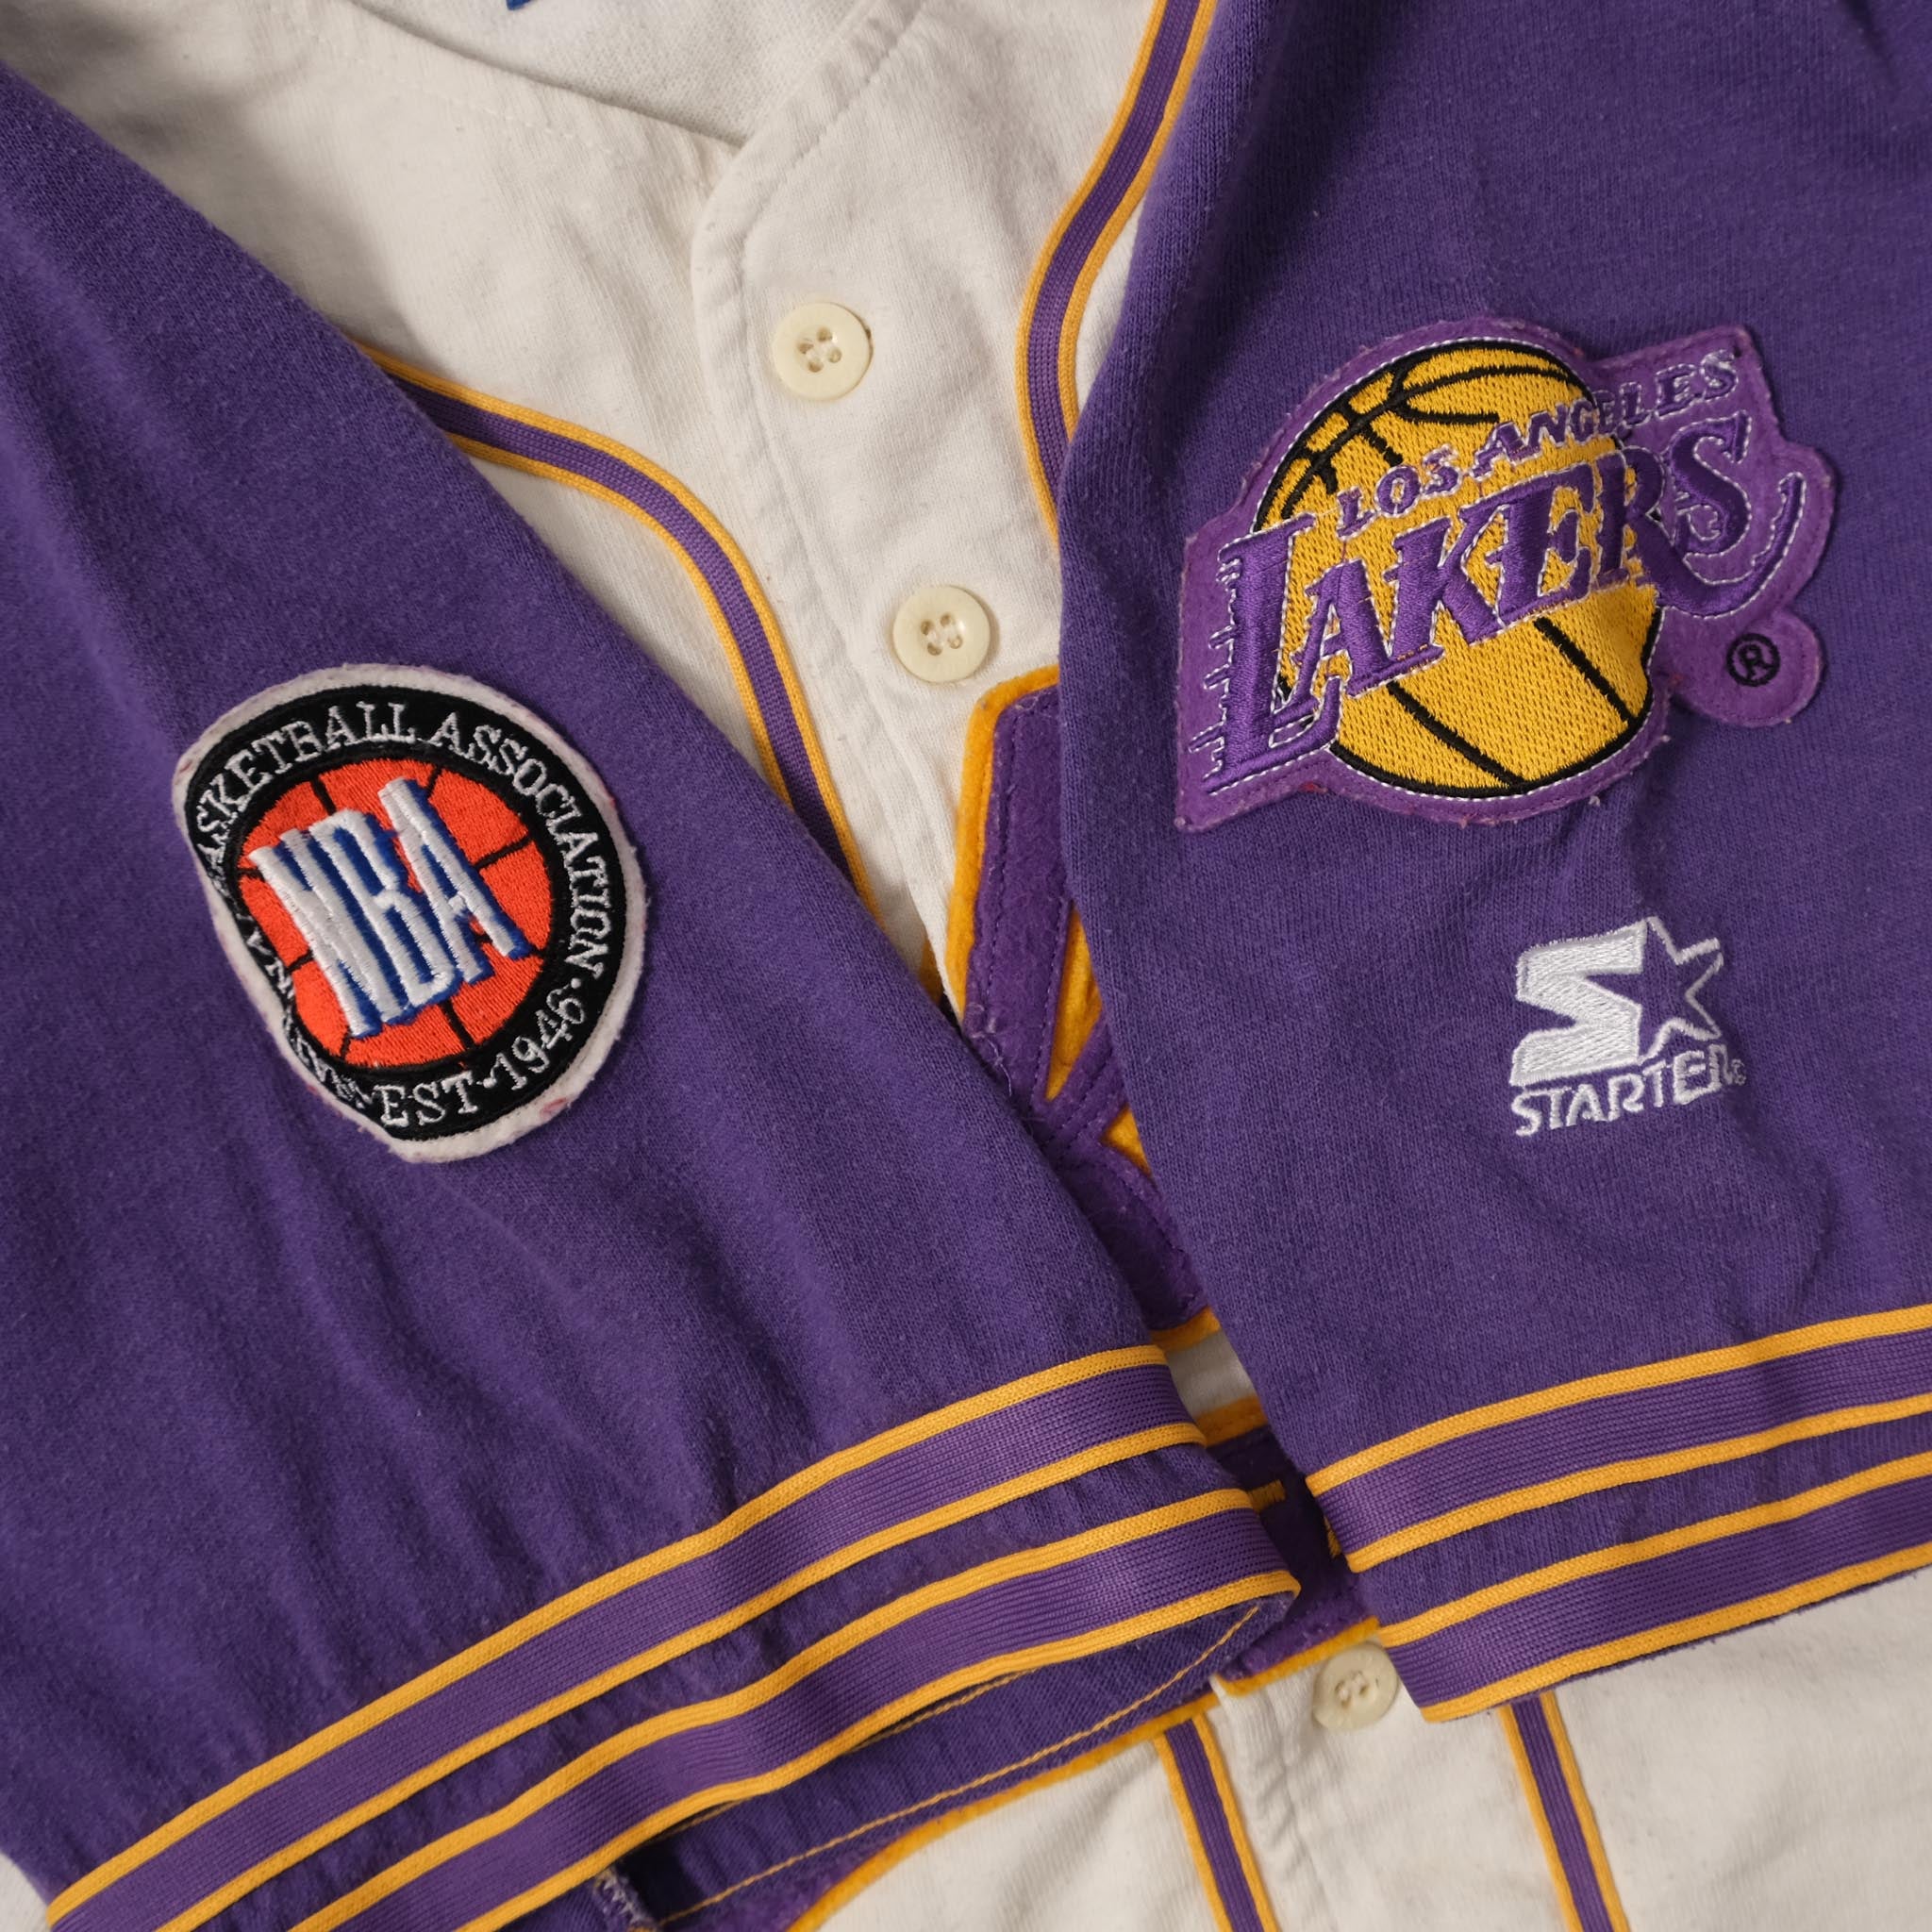 Men's Los Angeles Lakers Baseball Jersey - All Stitched - Vgear